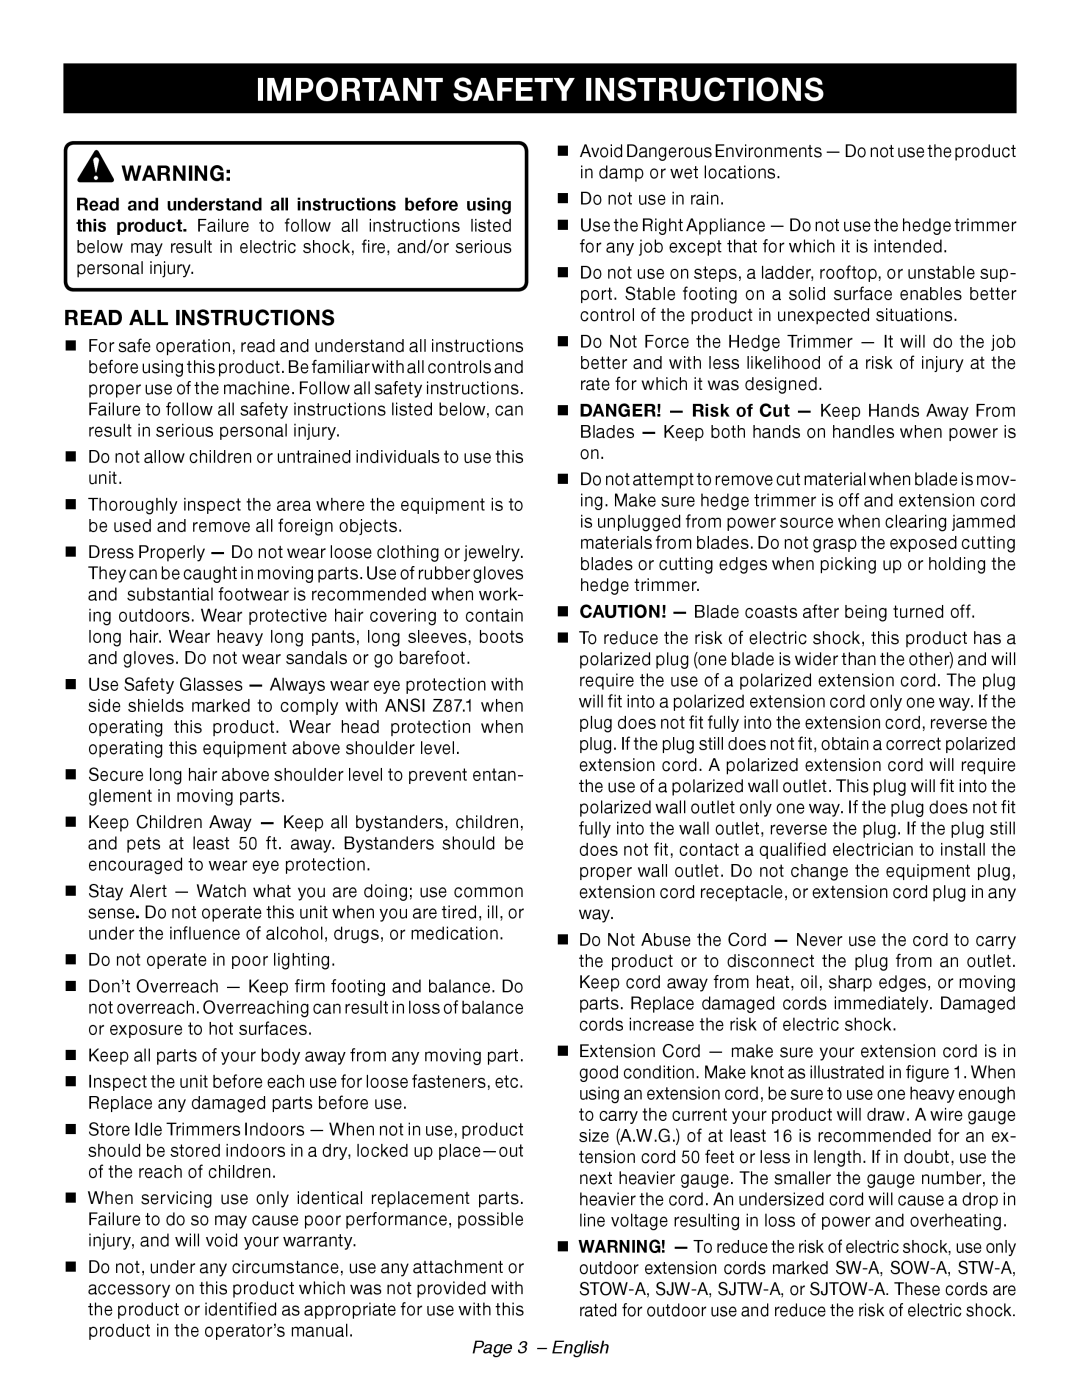 Ryobi RY44140 manuel dutilisation Important Safety Instructions, Read All Instructions, Page 3 - English 